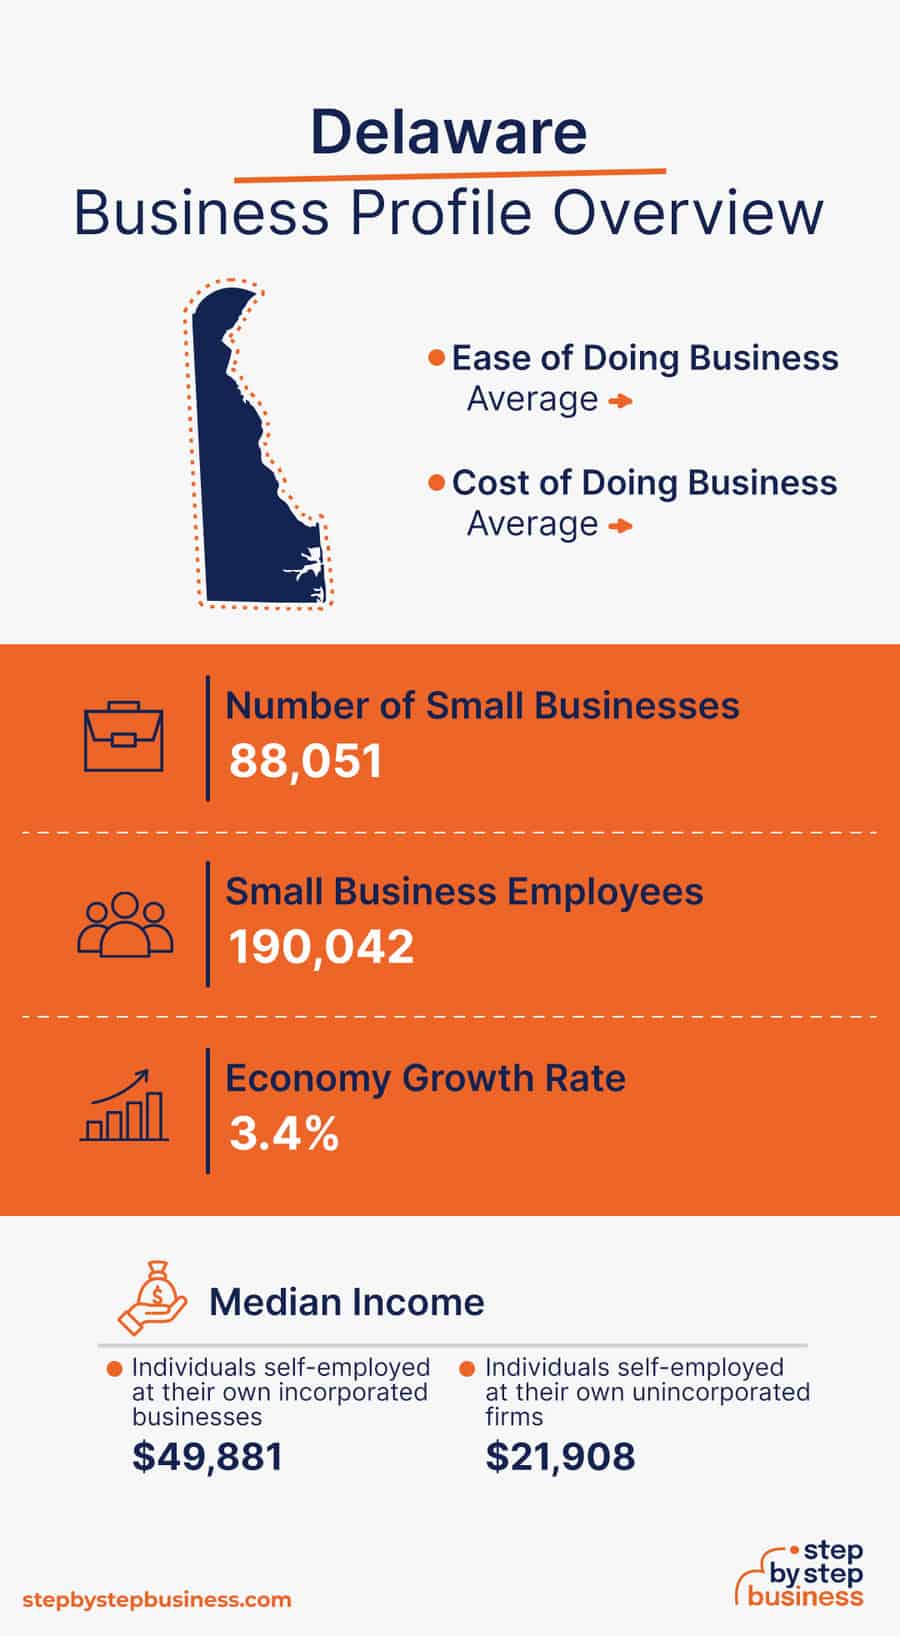 Delaware Business Profile Overview